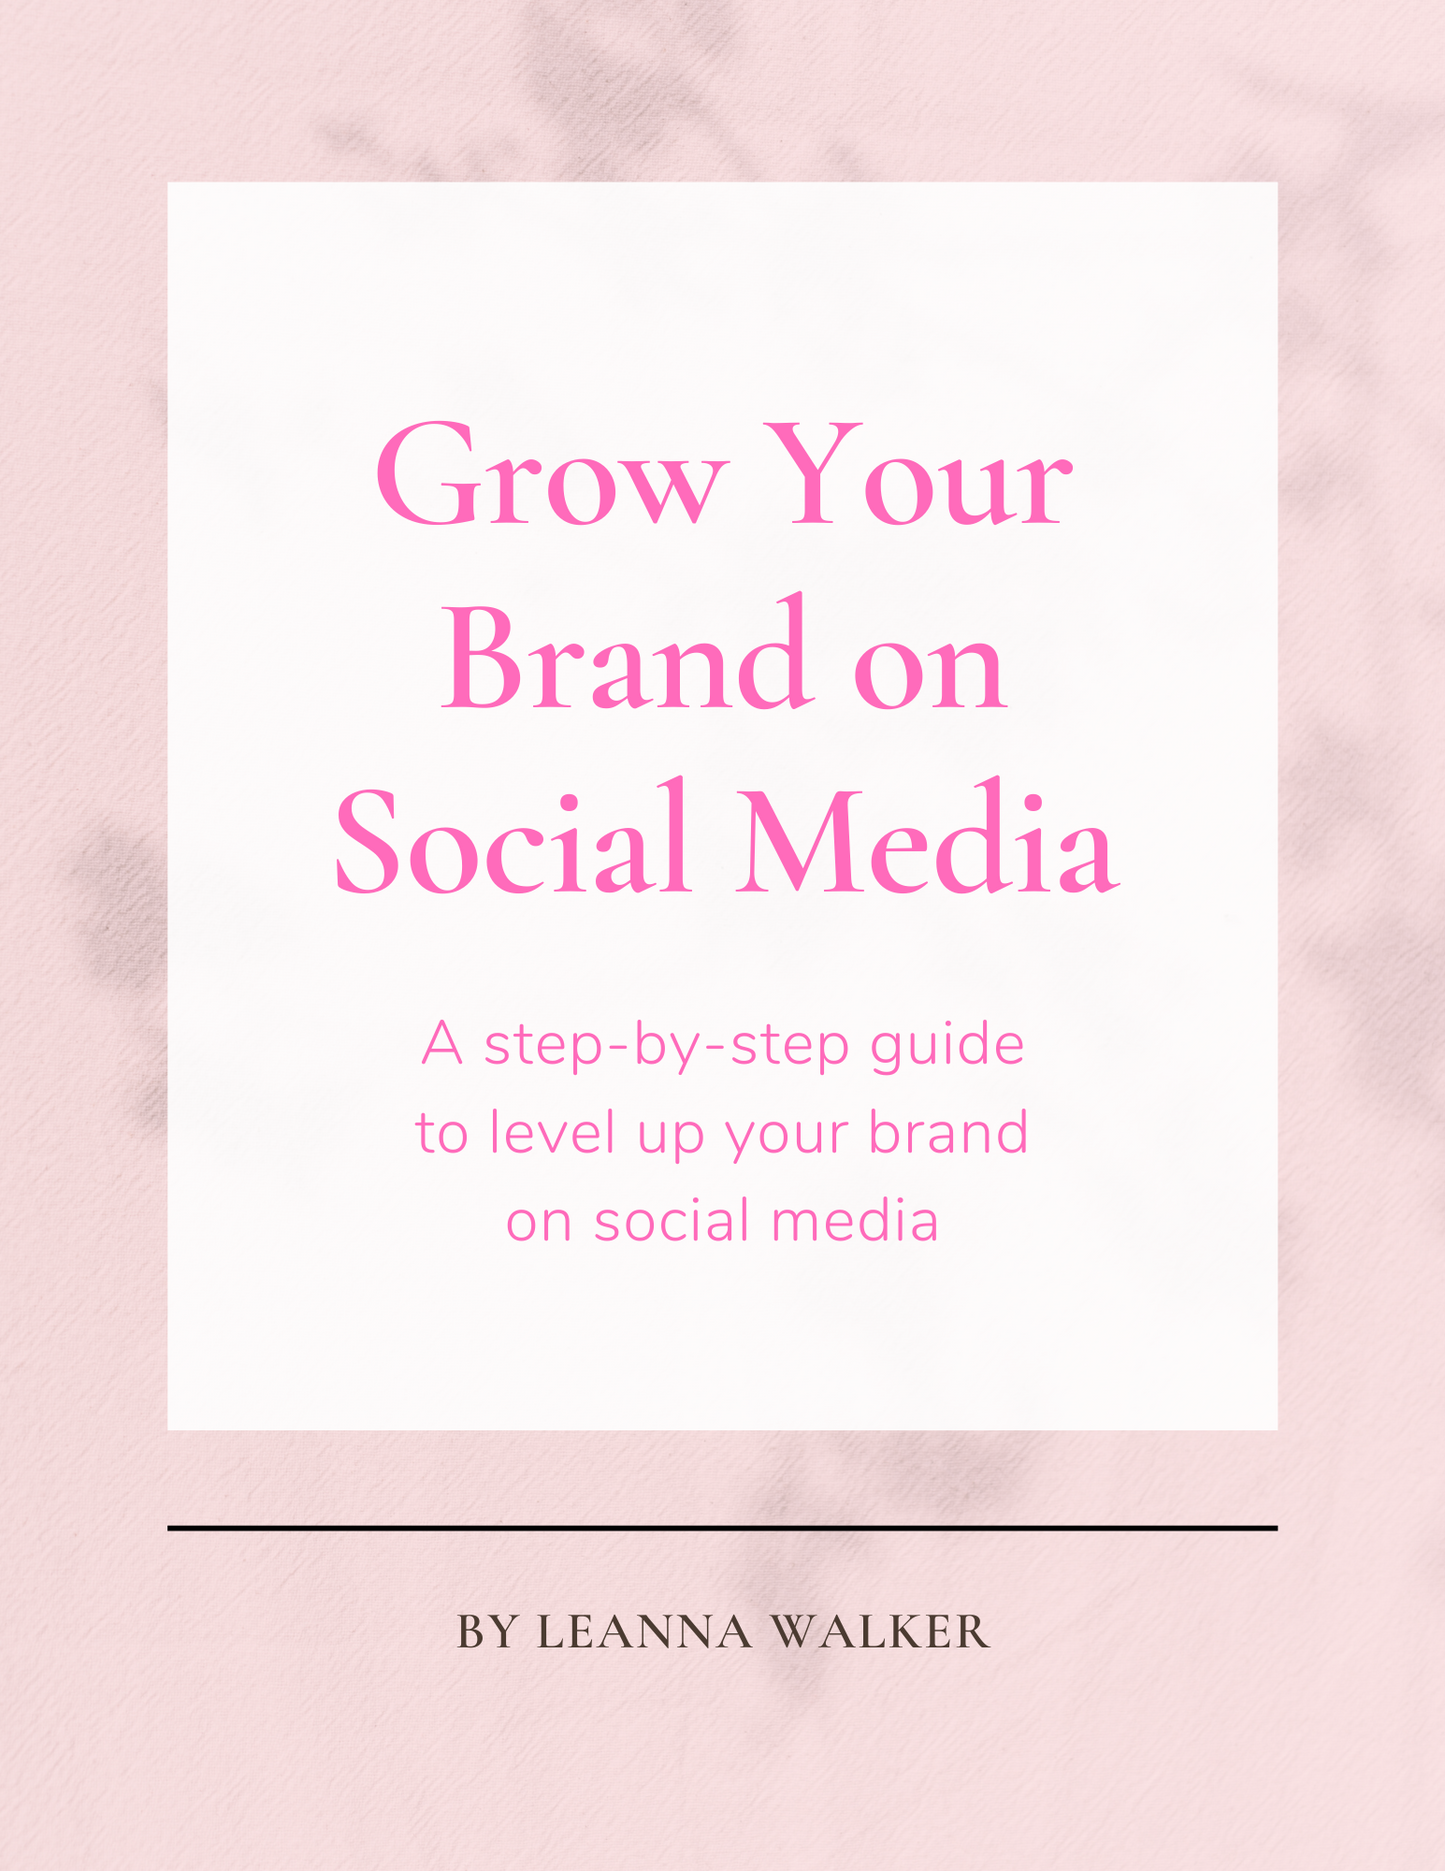 A Guide to Growing Your Brand on Social Media